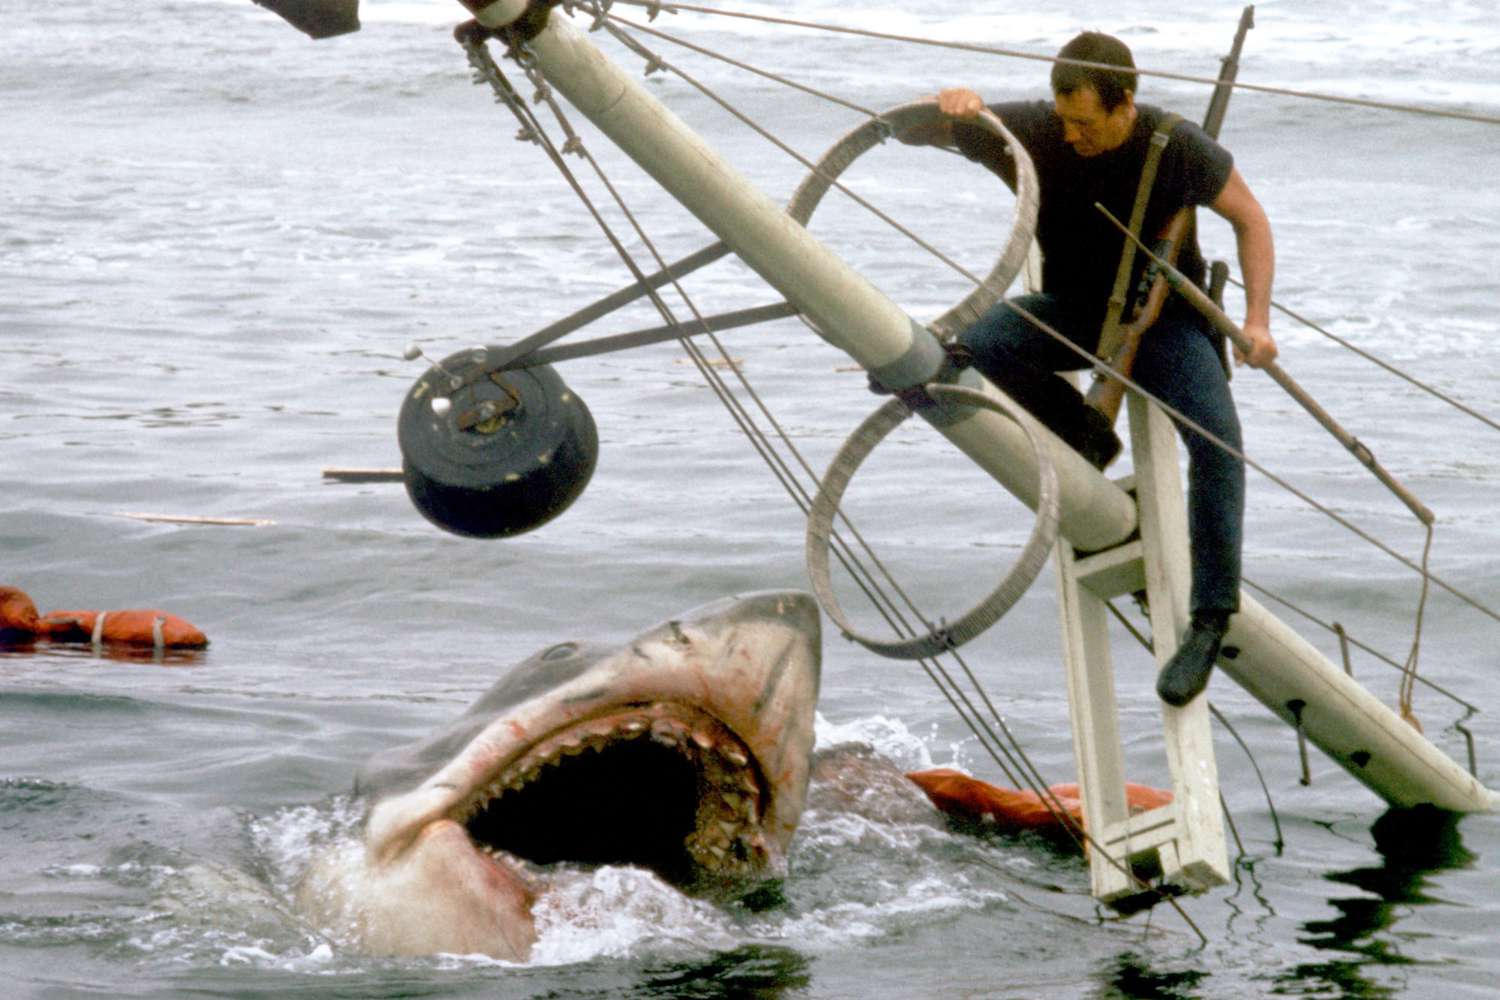 American actor Roy Scheider on the set of Jaws, directed by Steven Spielberg. (Photo by Sunset Boulevard/Corbis via Getty Images)